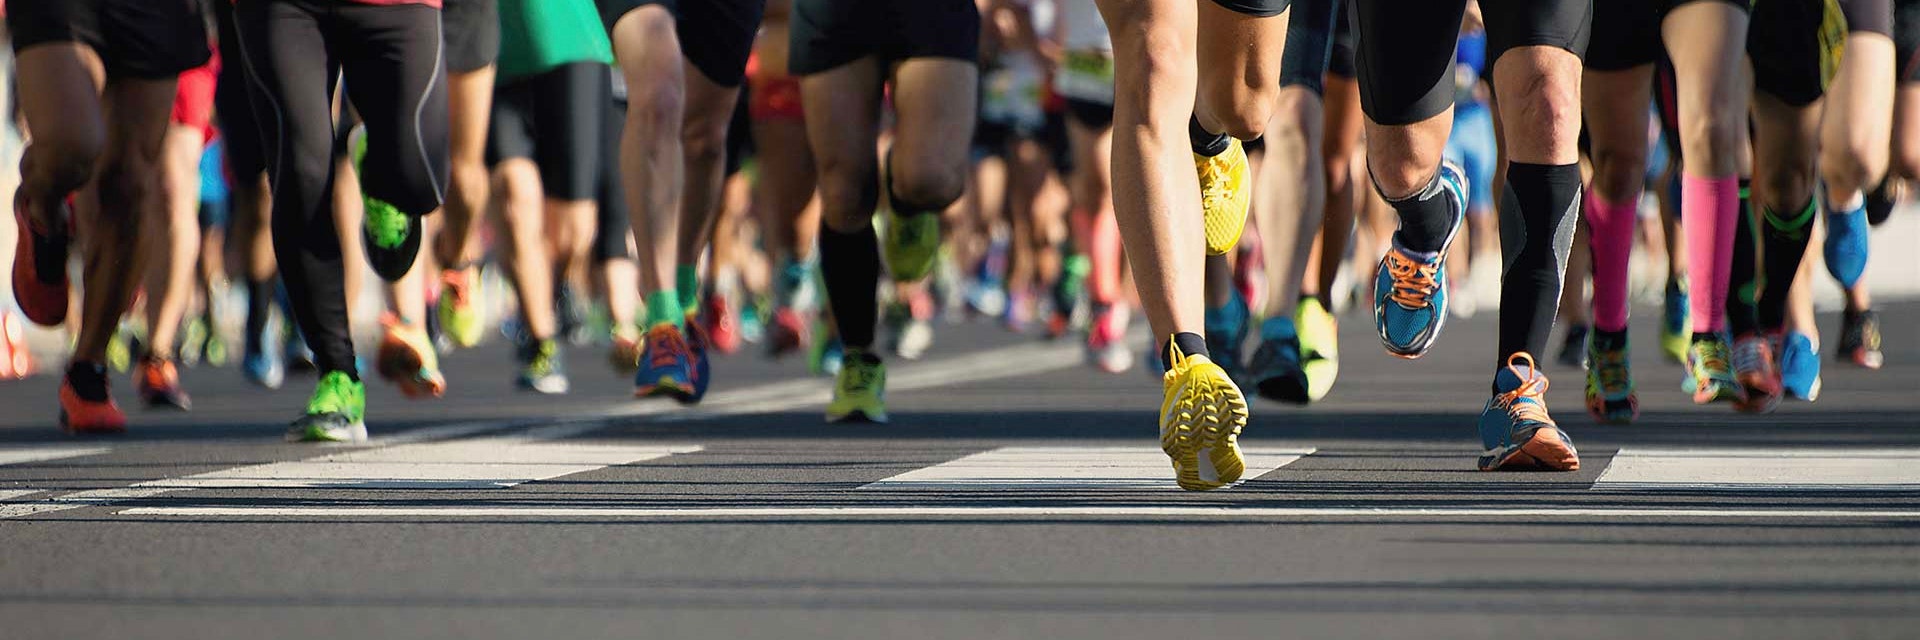 View of runners' legs running as they begin a race